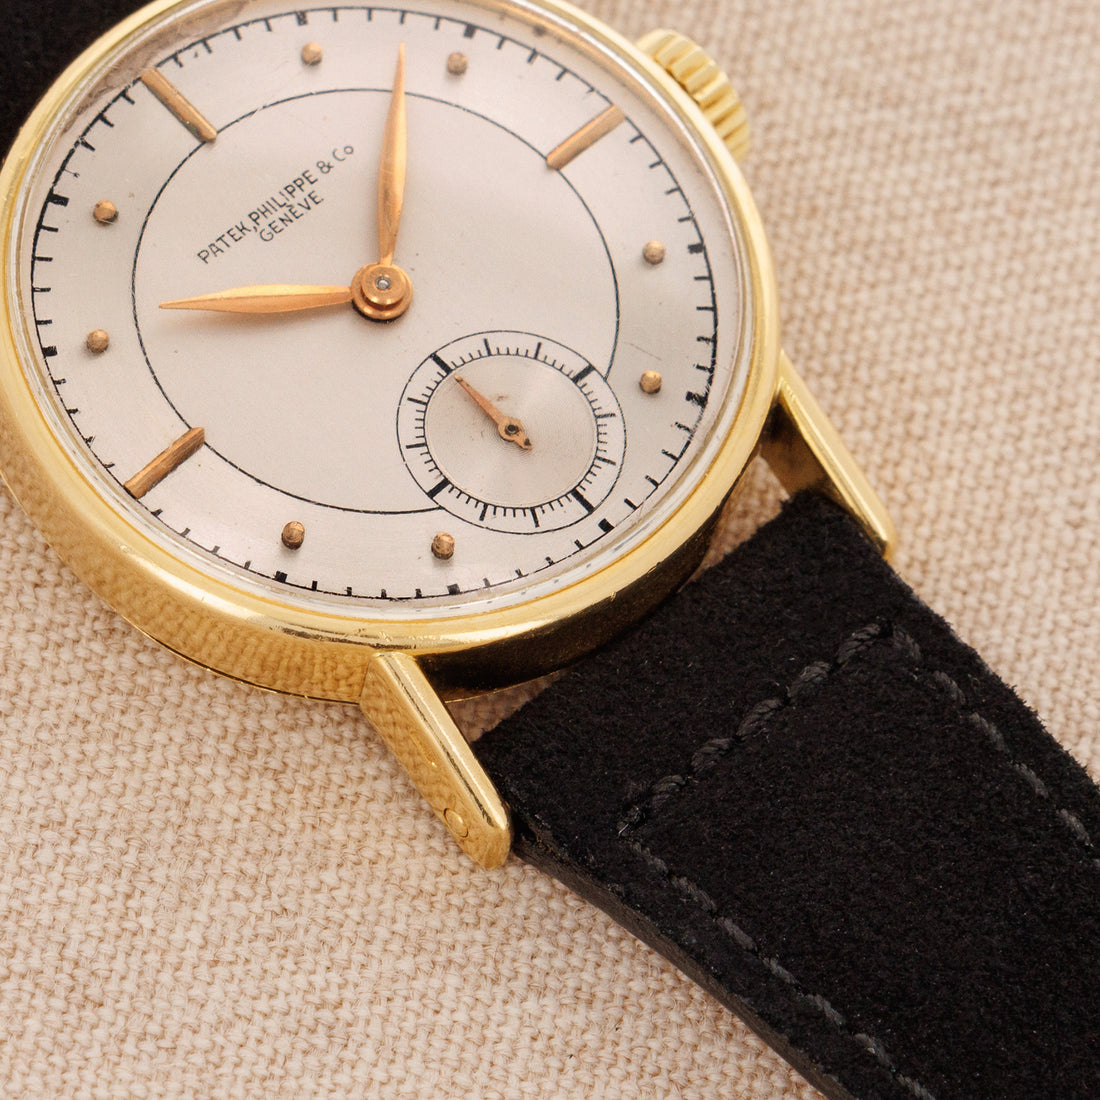 Patek Philippe Yellow Gold Calatrava Ref. 534 with Silver Sector Dial